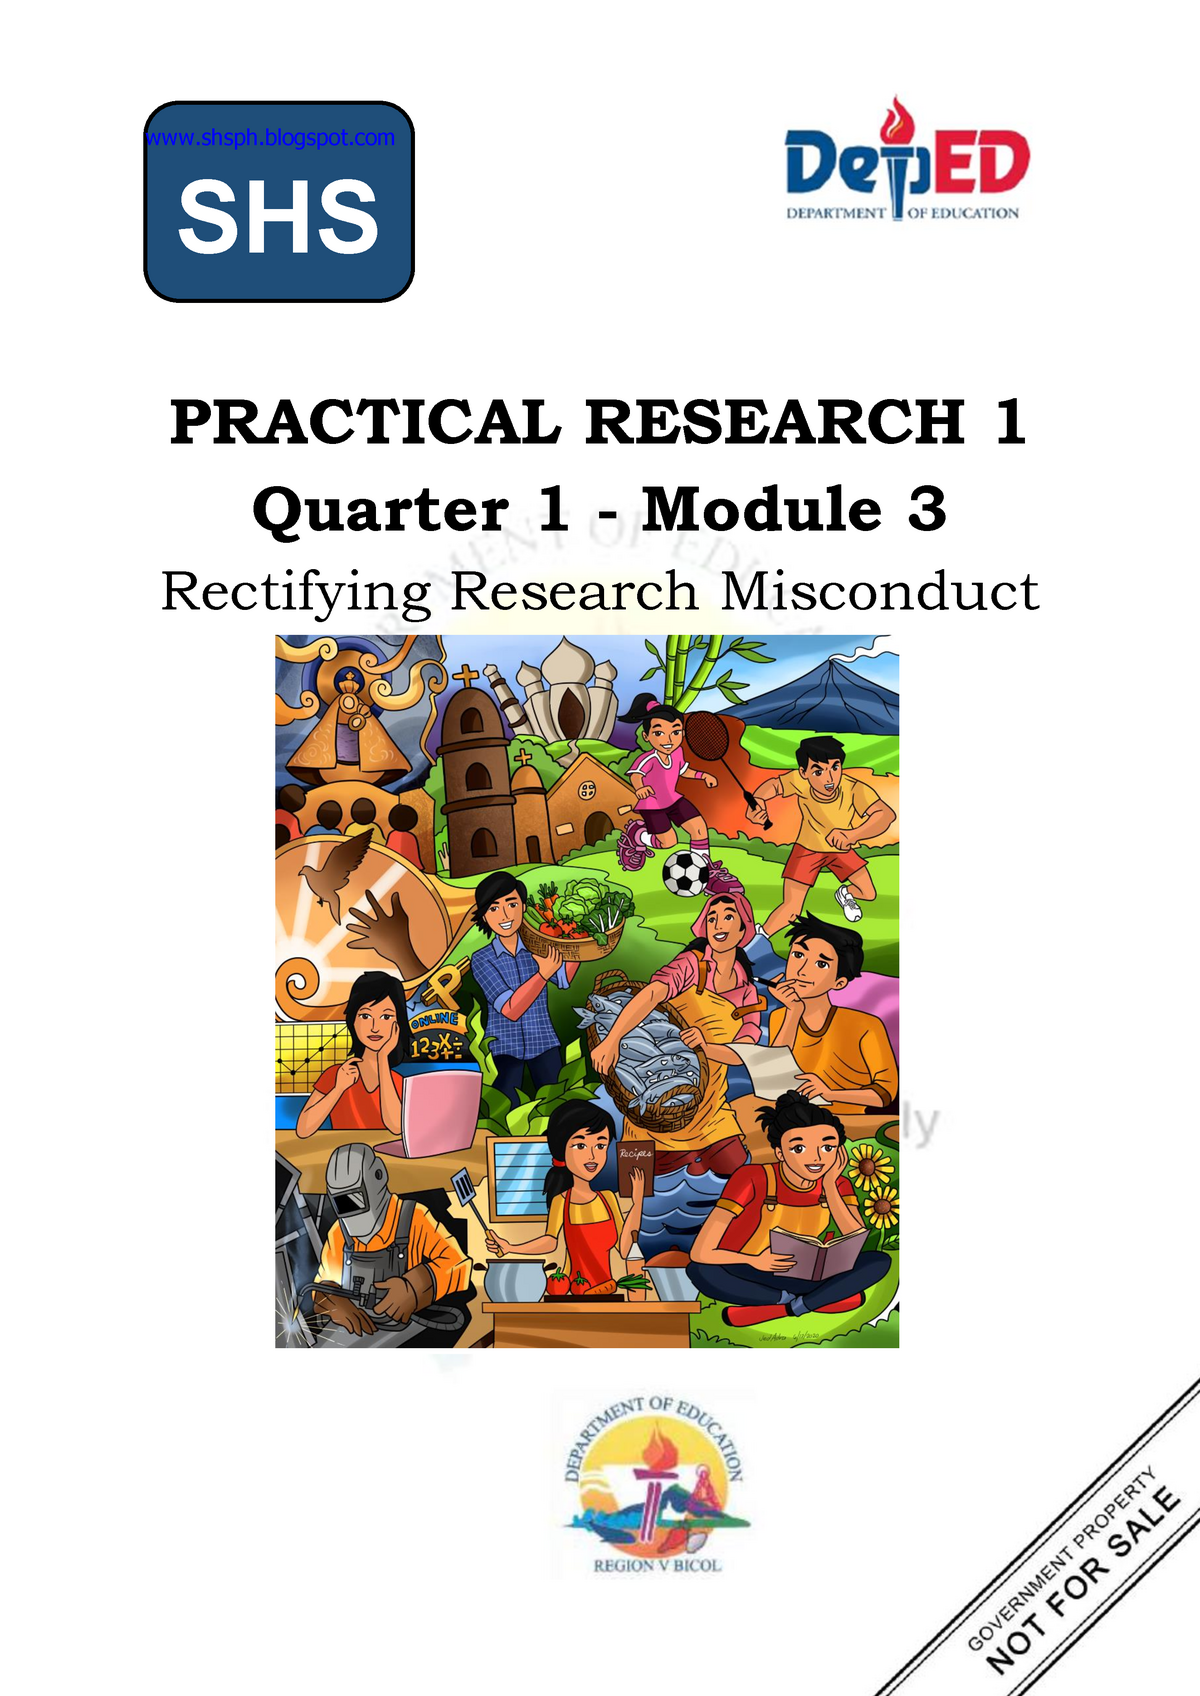 reflection about practical research 1 grade 11